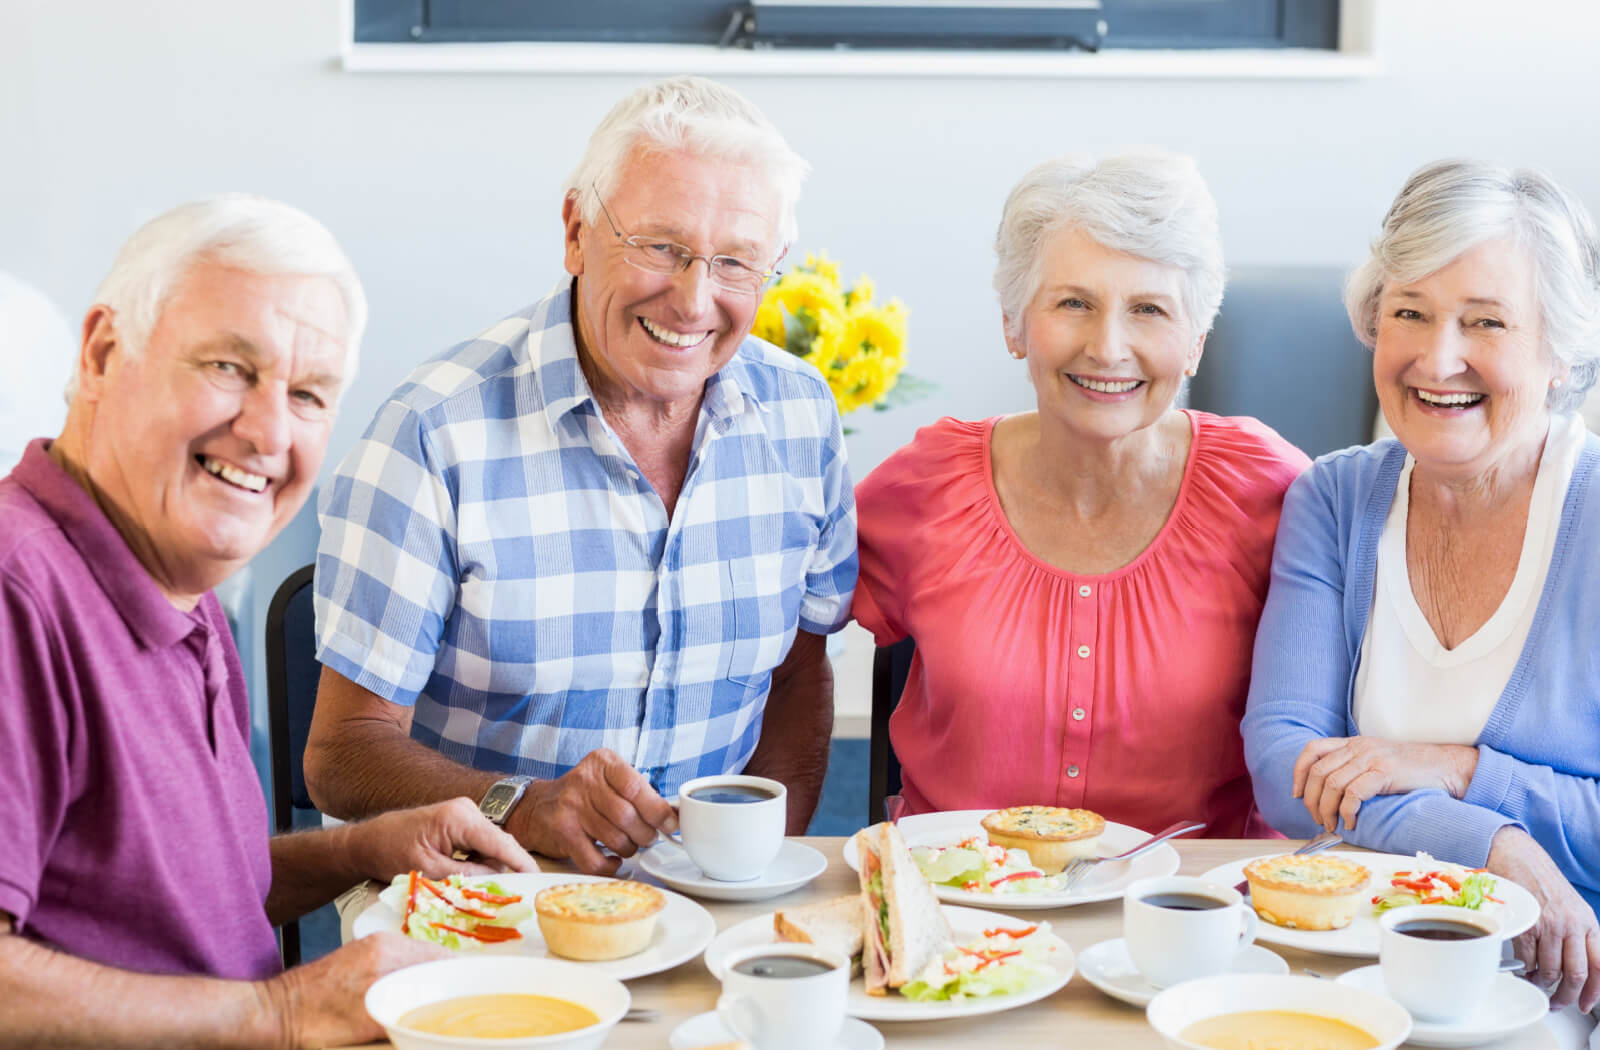 A group of seniors  sitting around a table, eating and having a sandwich and tea, while smiling  and looking directly at the camera.